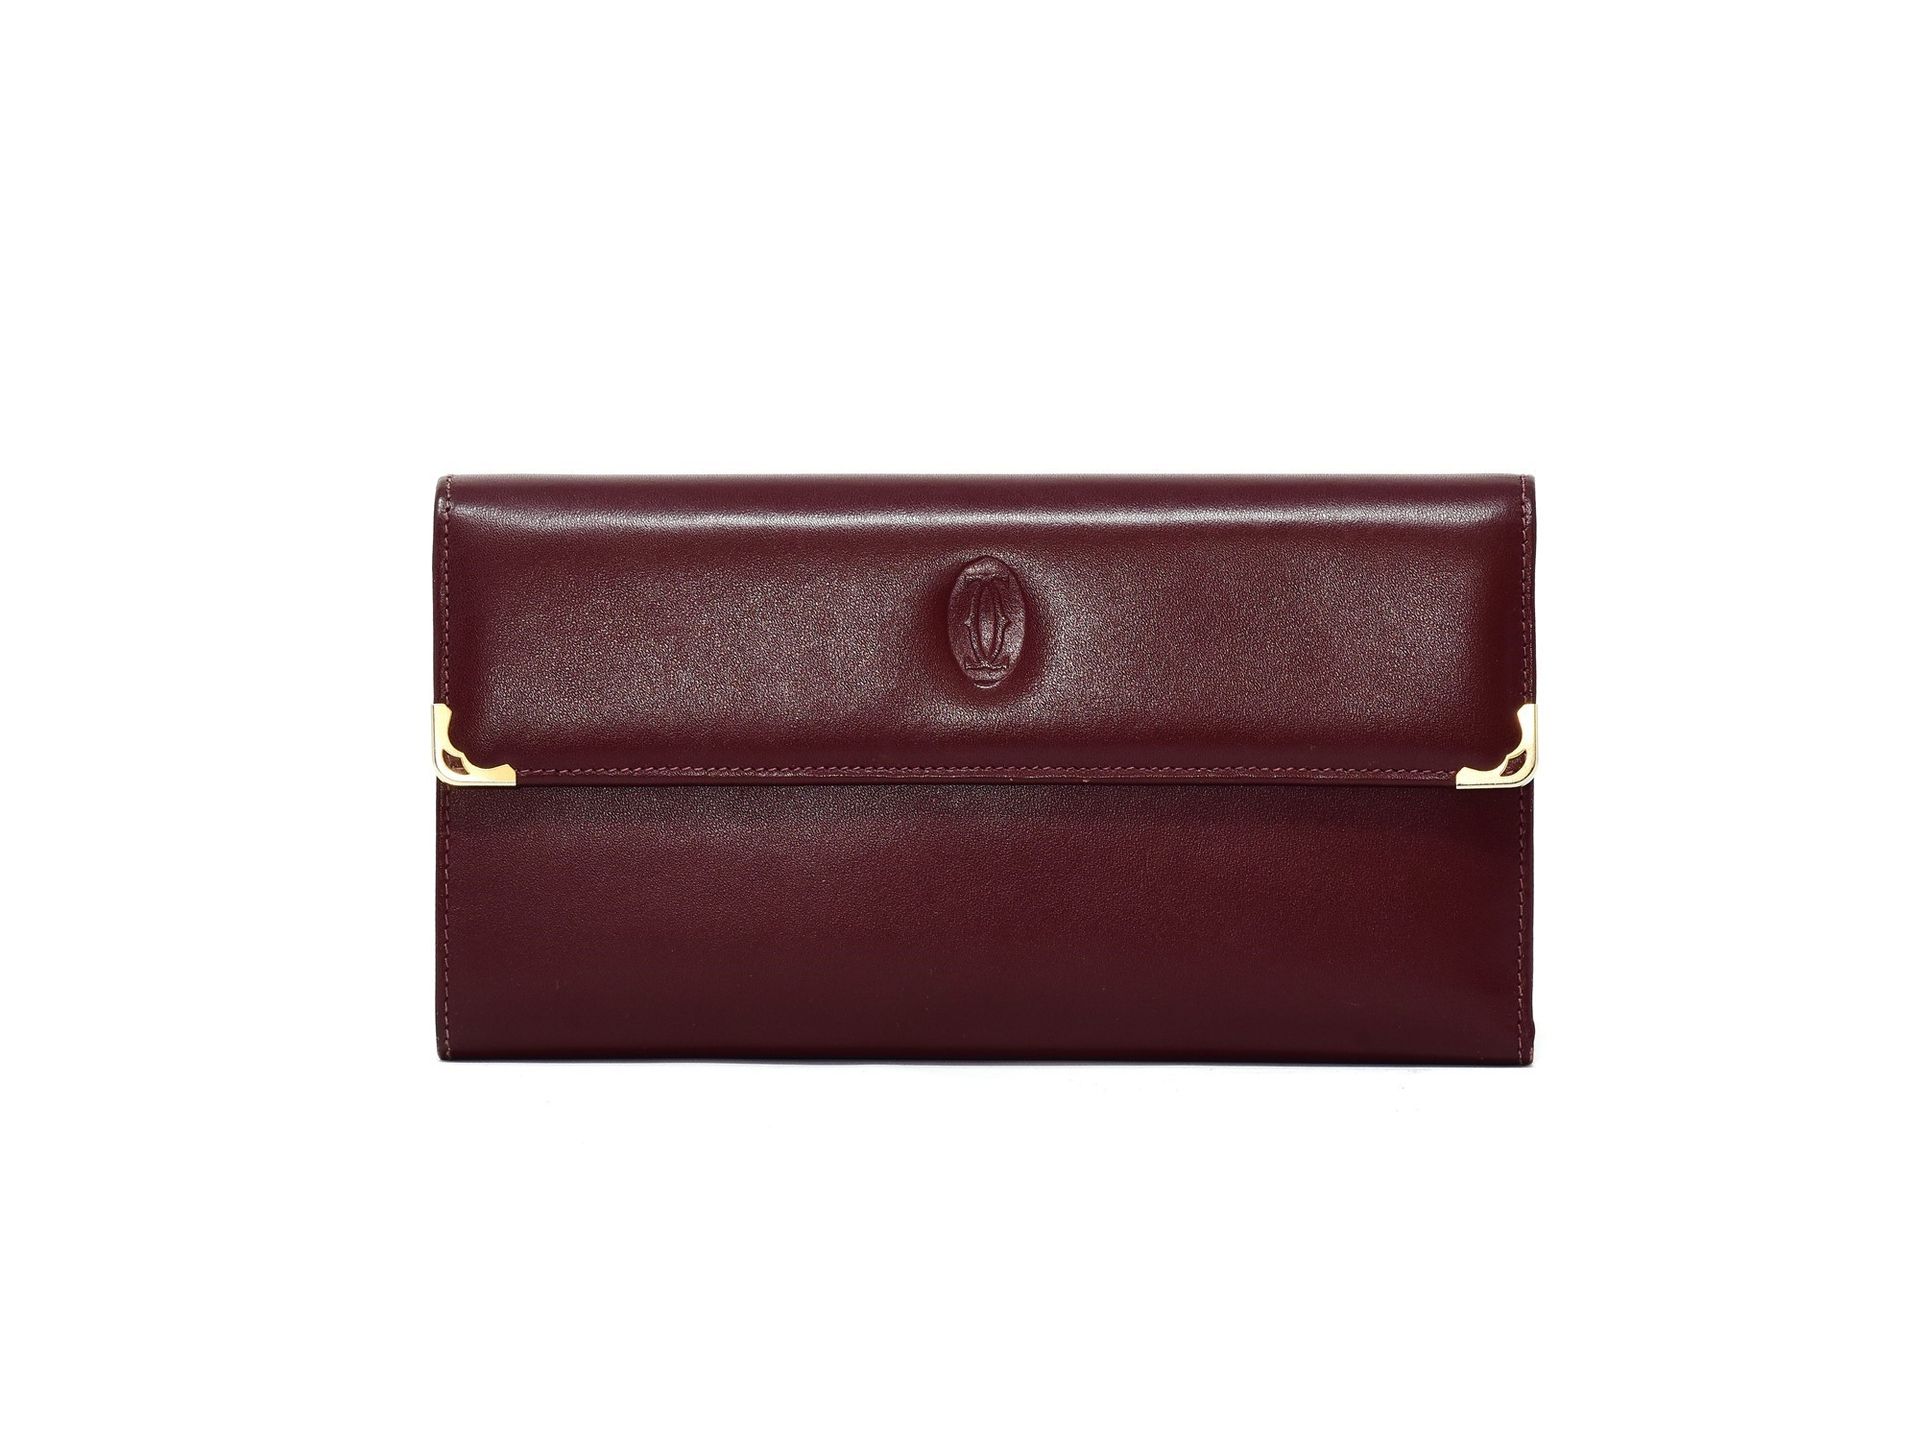 CARTIER Les Must de Cartier burgundy leather travel wallet with coin holder, bil&hellip;